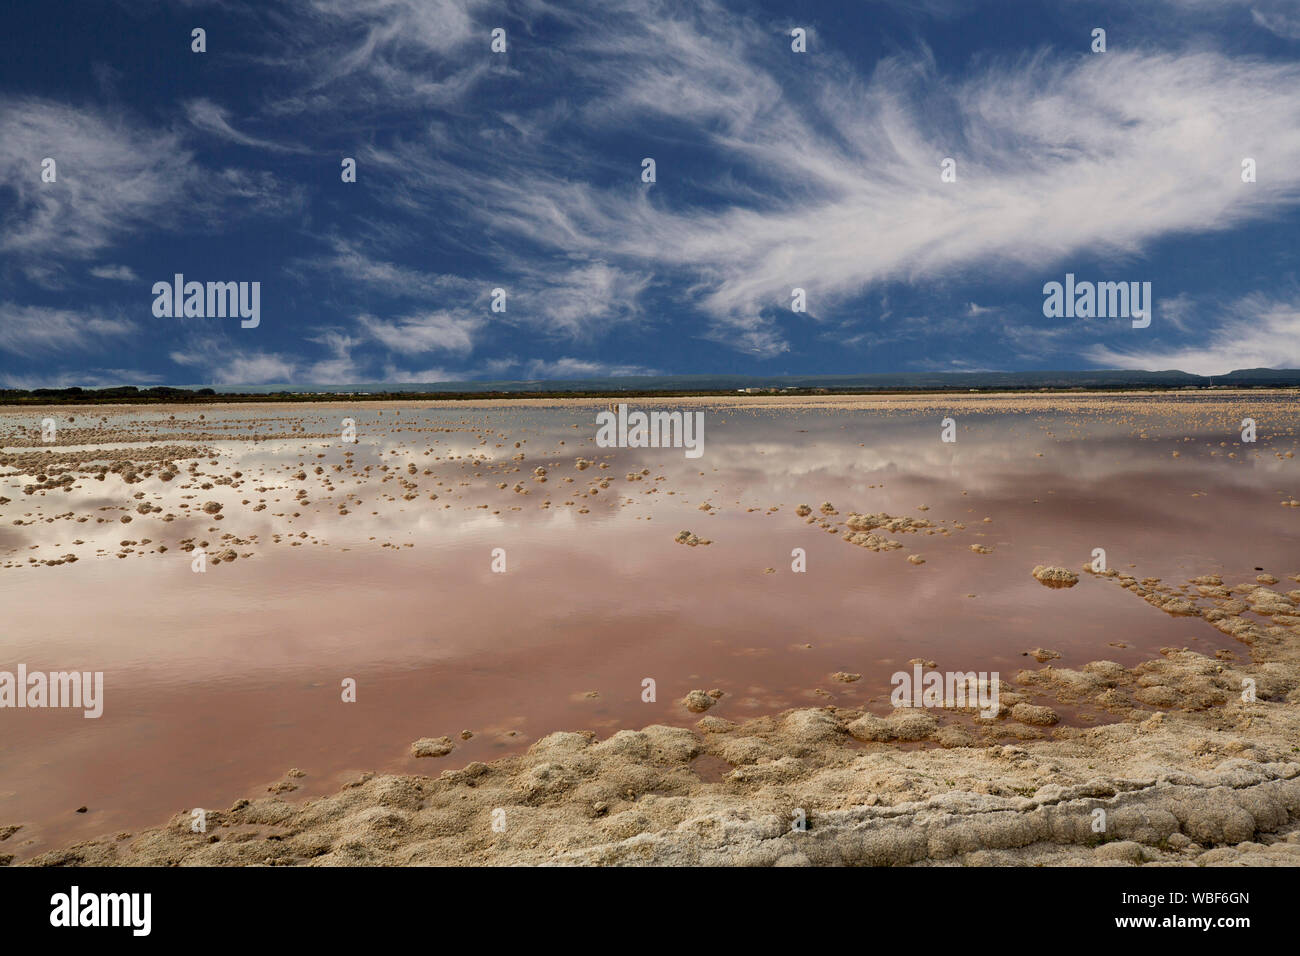 Vast salt lagoon with pink water and clumps of white salt under blue sky streaked with clouds at Saint Kilda, South Australia Stock Photo